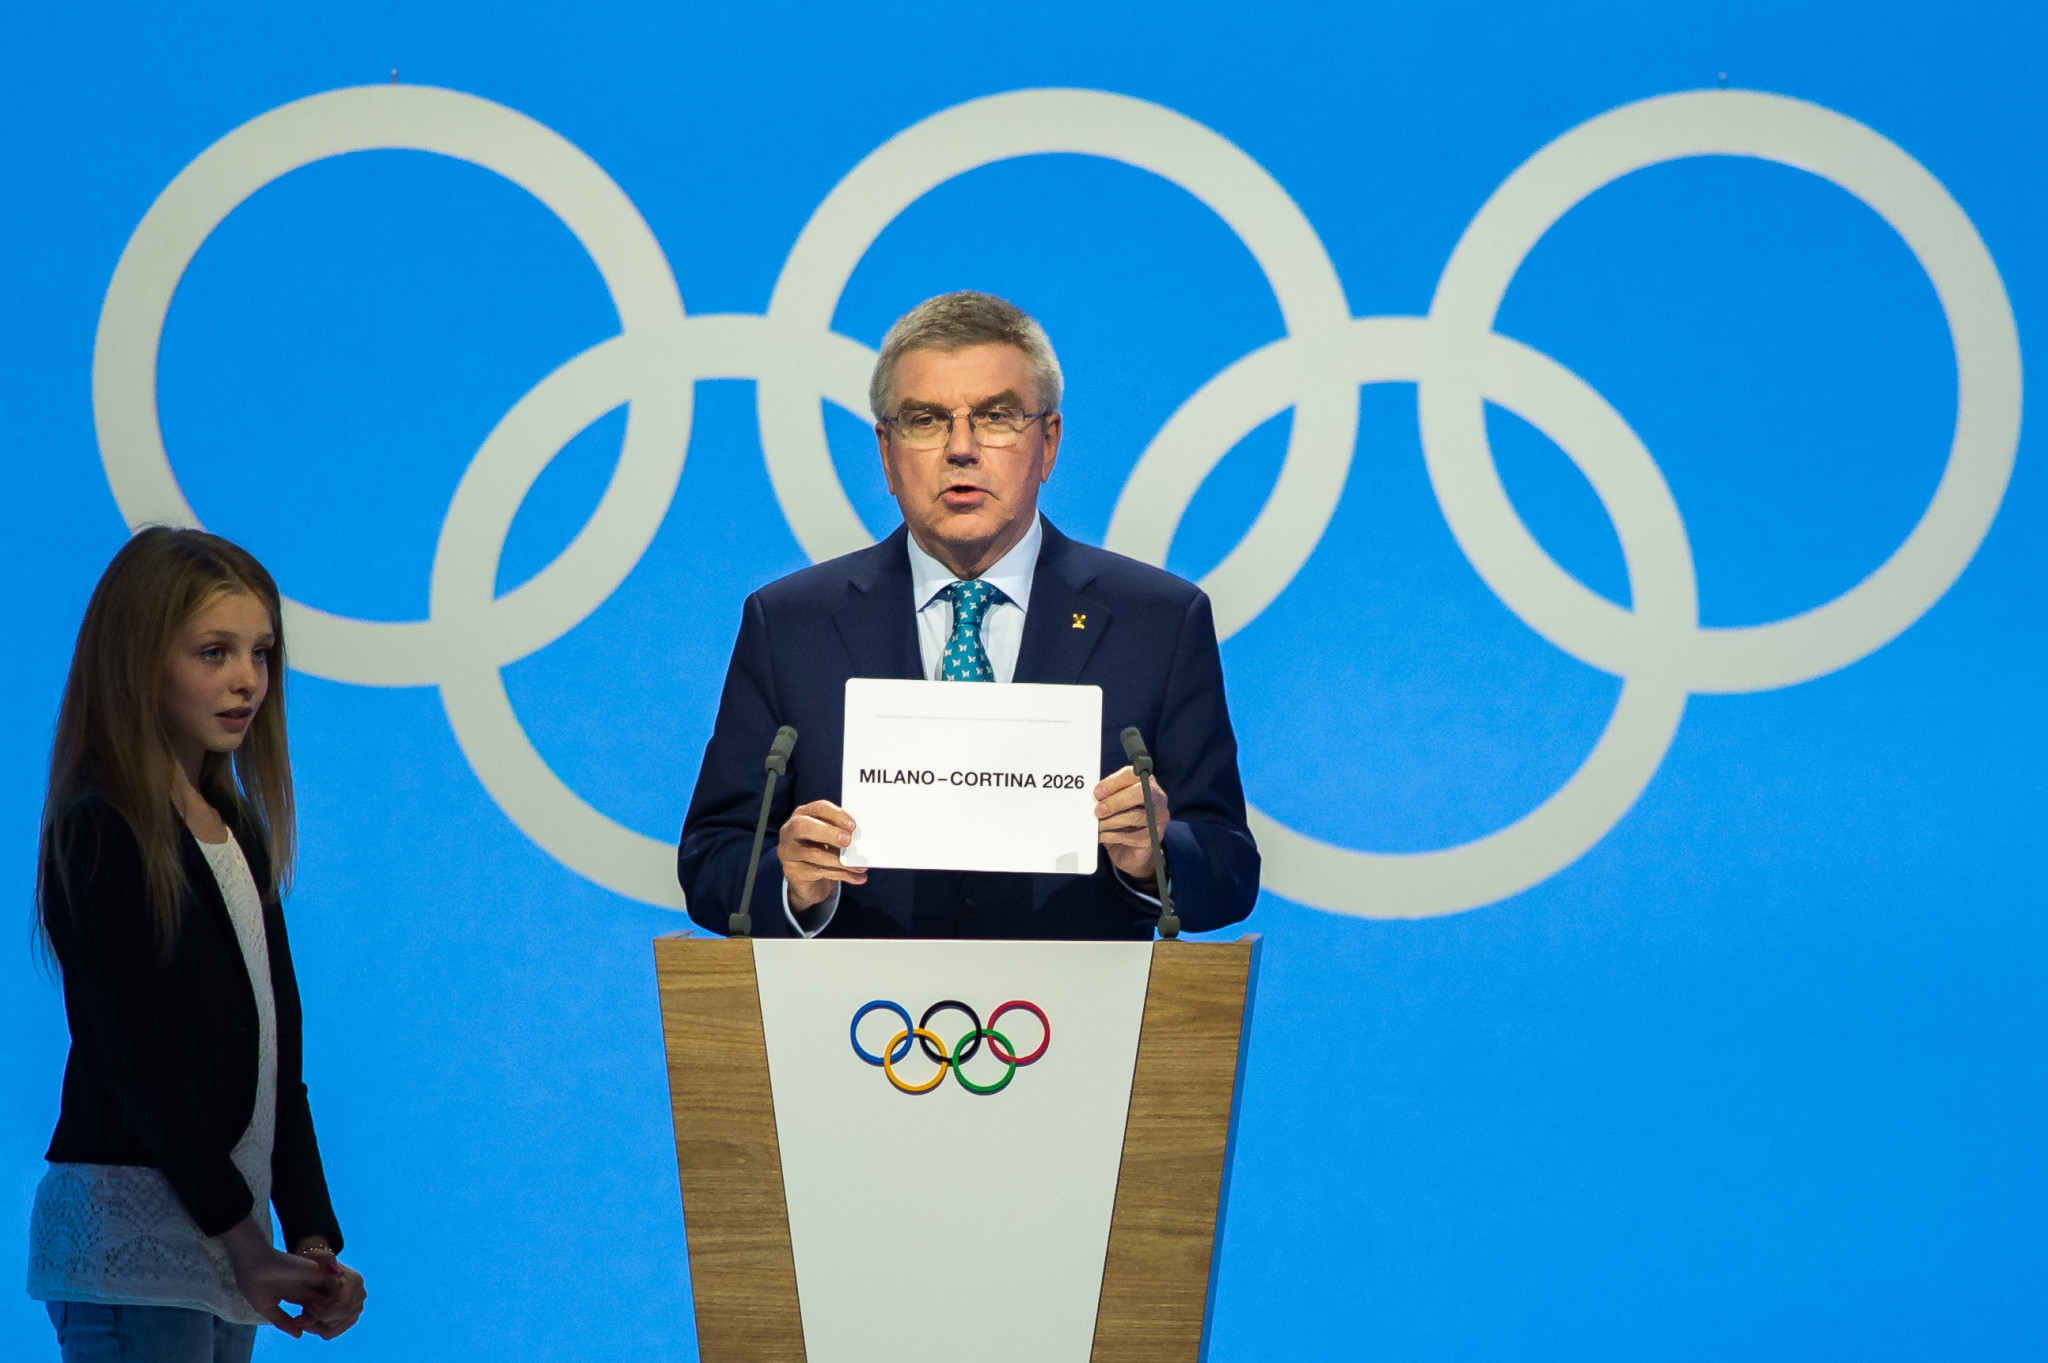 Milan Cortina 2026 were awarded the Winter Olympic and Paralympic Games because they understood better how the political game in the IOC was played - especially now there are new rules ©Getty Images